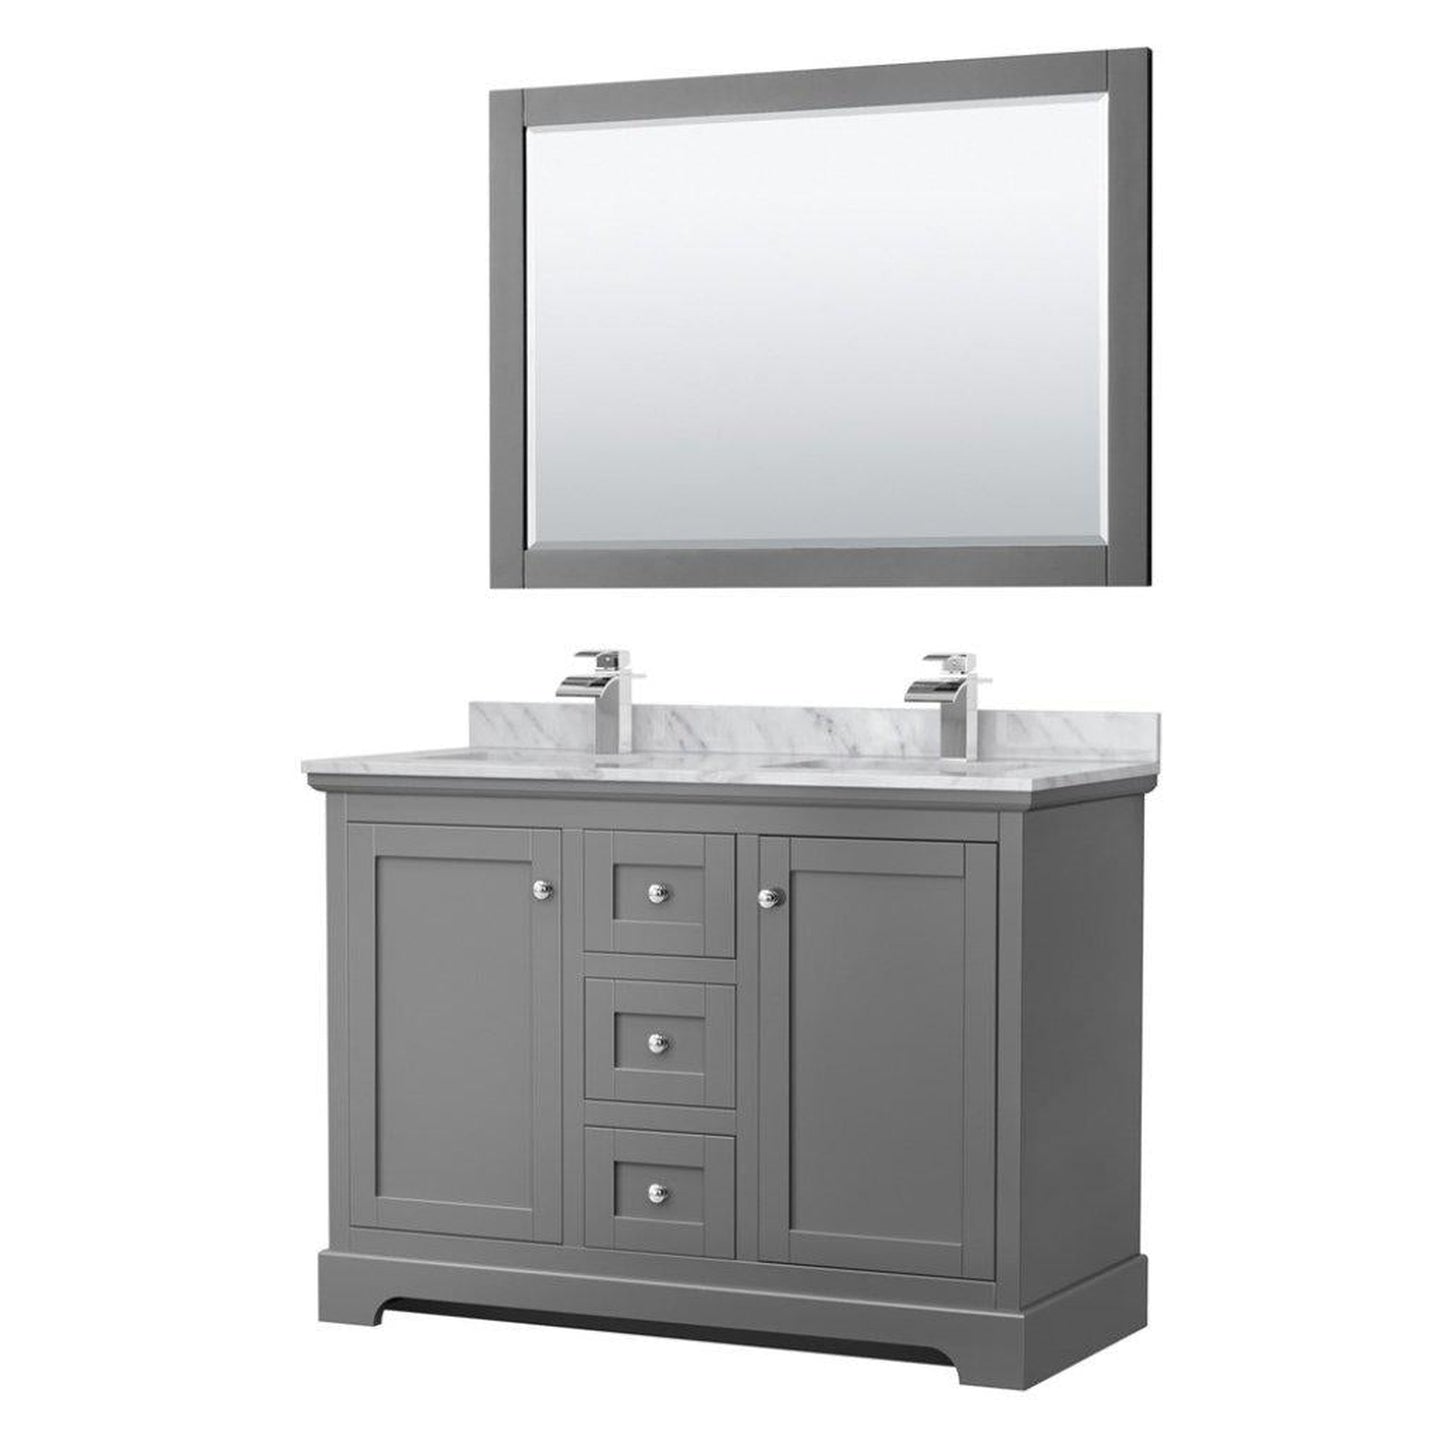 Wyndham Collection Avery 48" Dark Gray Double Bathroom Vanity Set With White Carrara Marble Countertop With 1-Hole Faucet And Square Sink And 46" Mirror